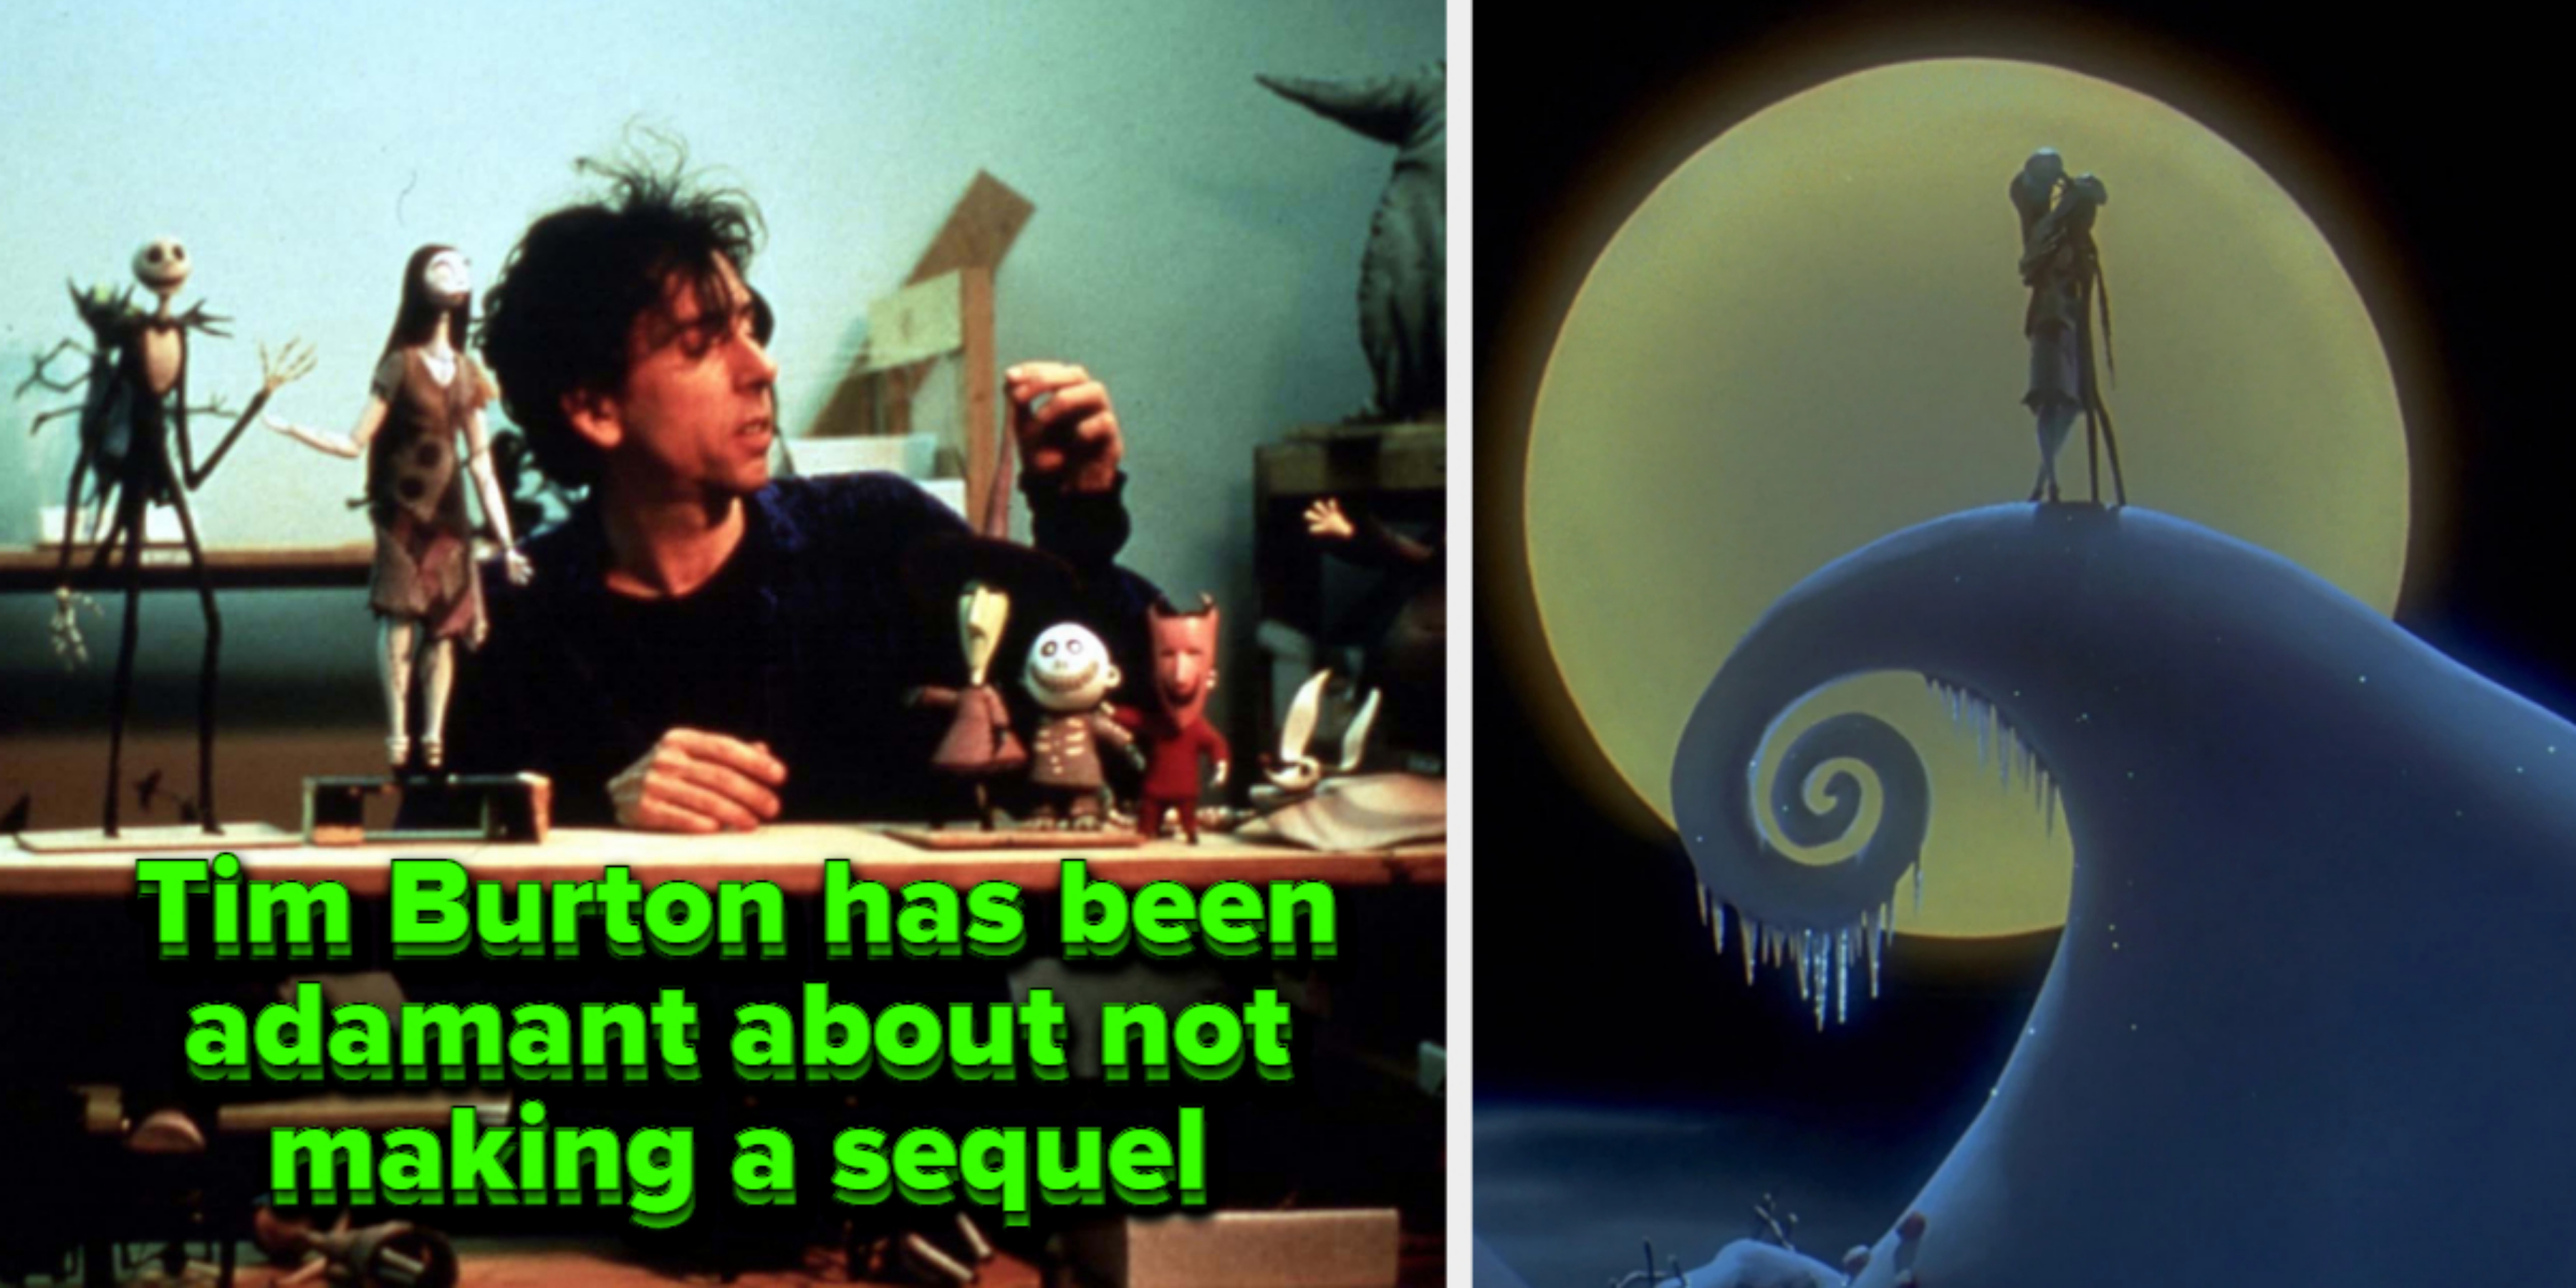 The Nightmare Before Christmas' Prequel Is Batted Around By